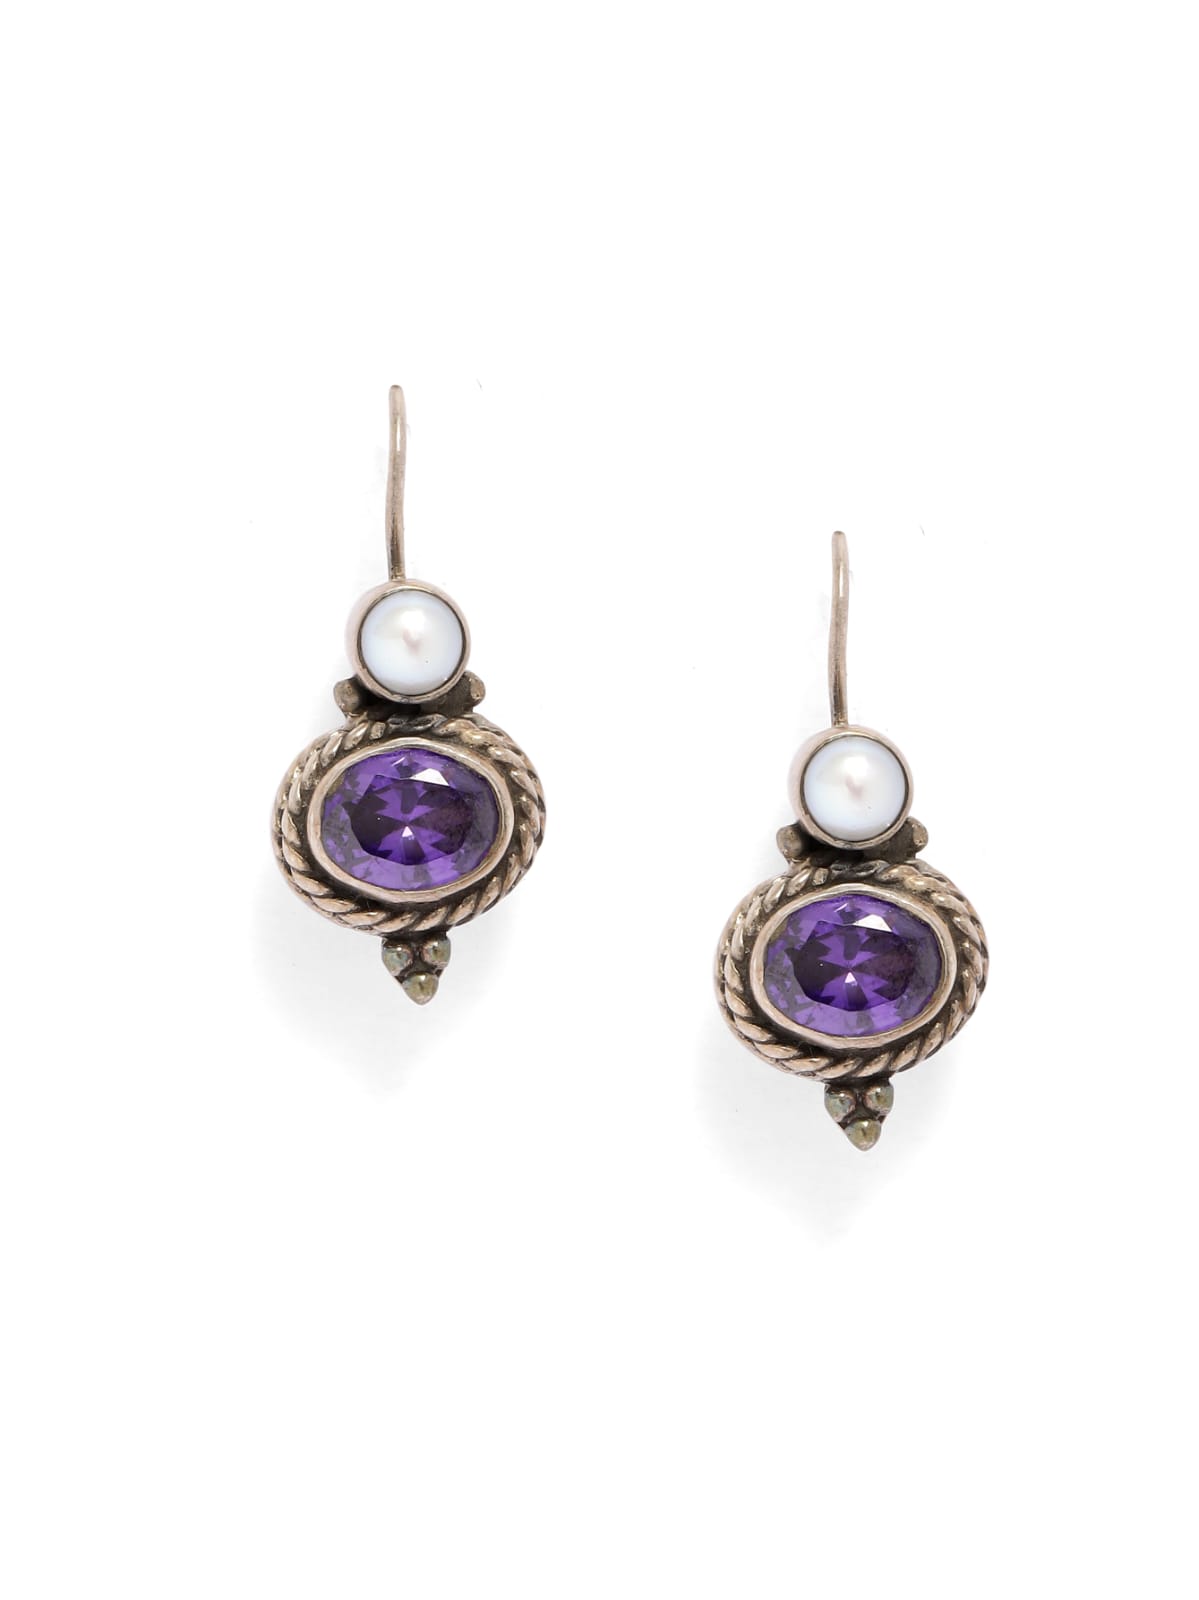 Sterling Silver hook earrings with Pearls and faceted Amethyst stones in Oxidised plating.